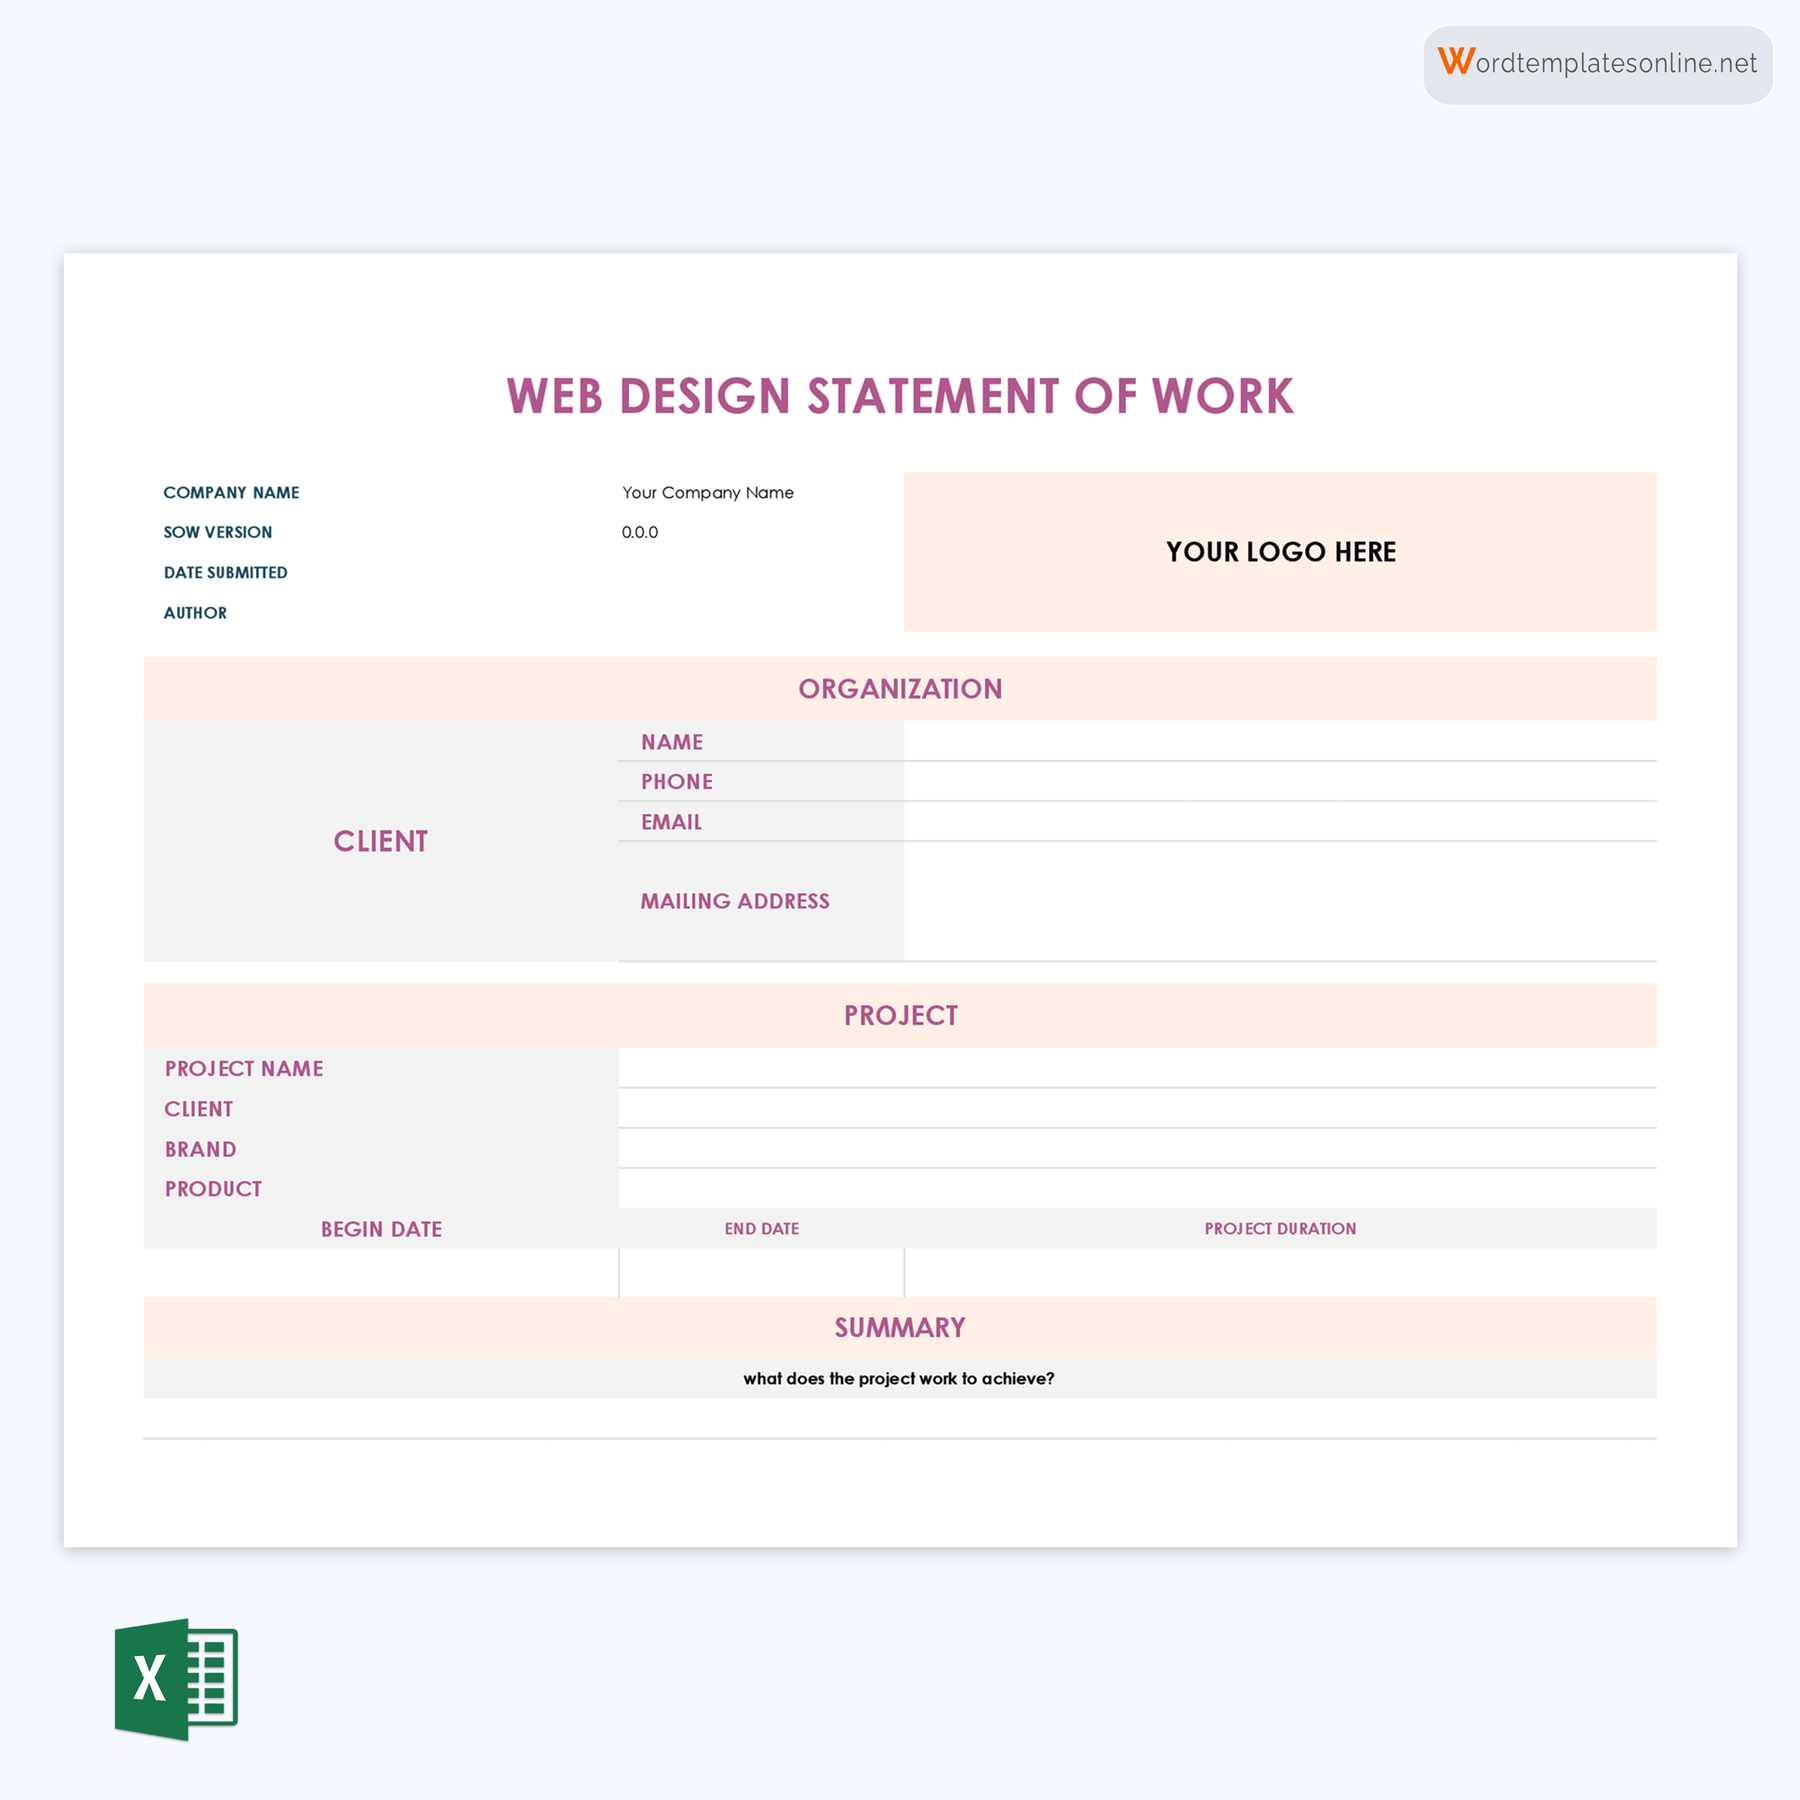 Downloadable Statement of Work Sample